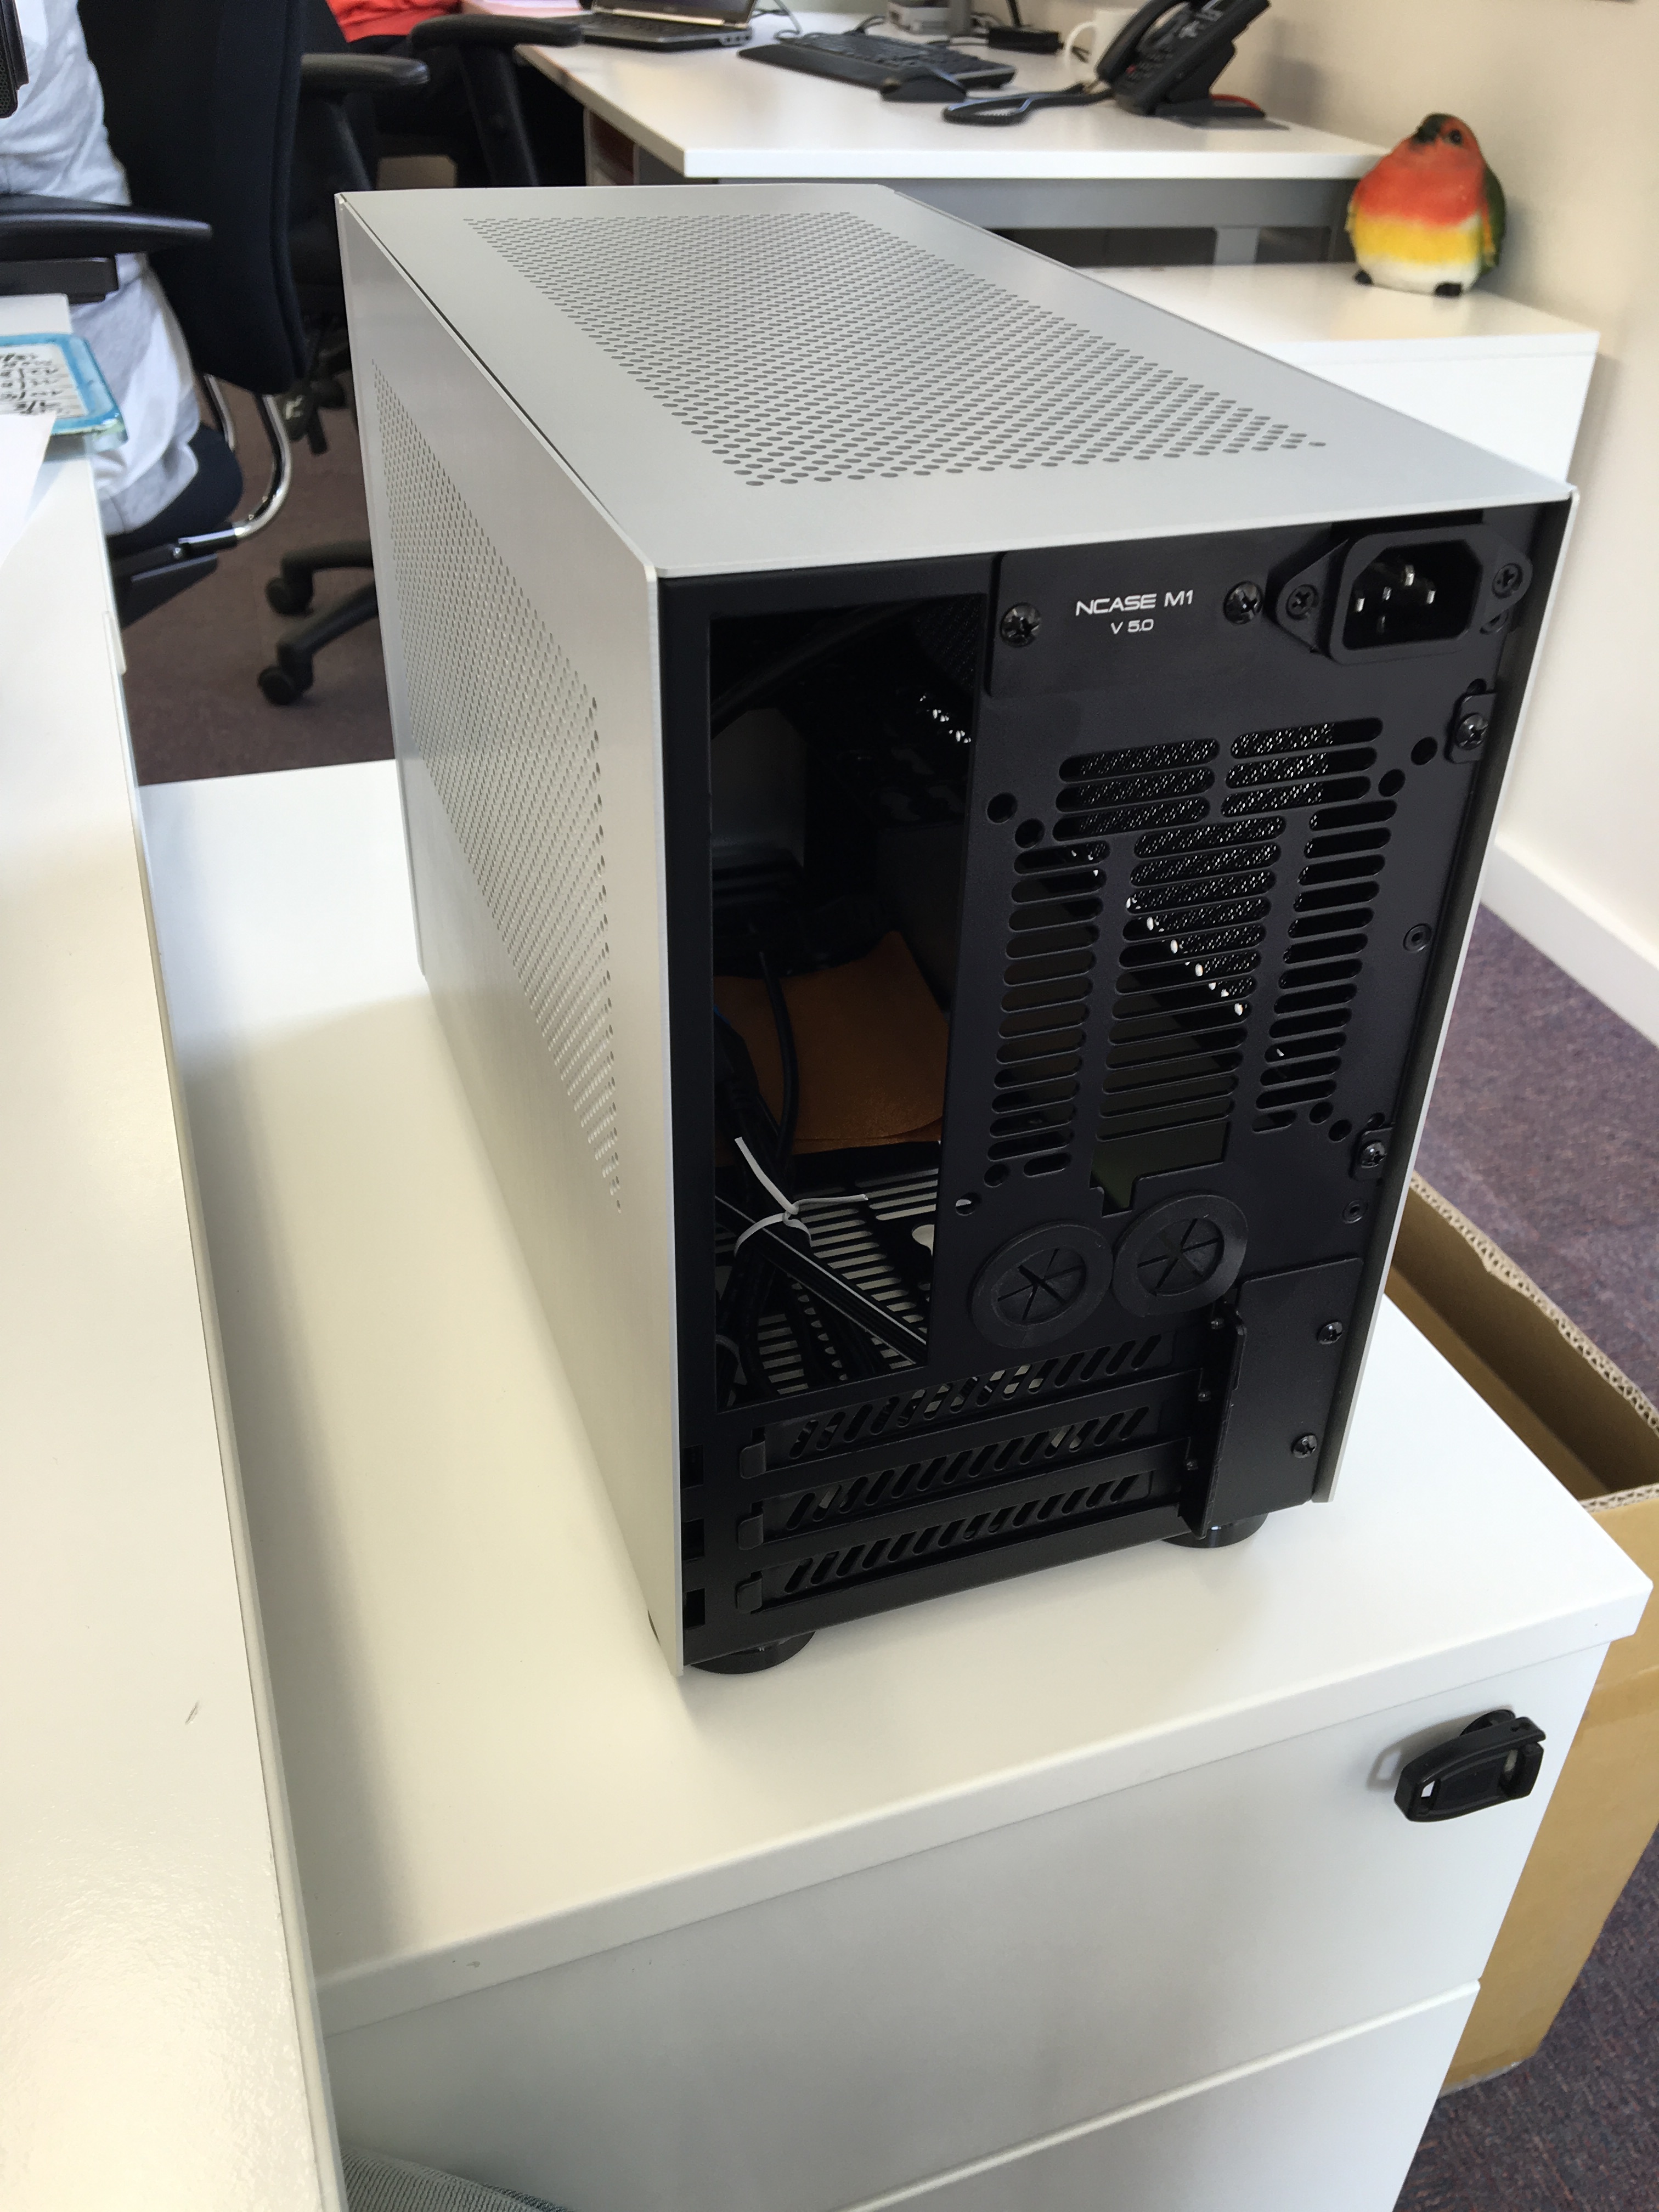 NCASE M1 v5 - Build + Planning - New Builds and Planning - Linus